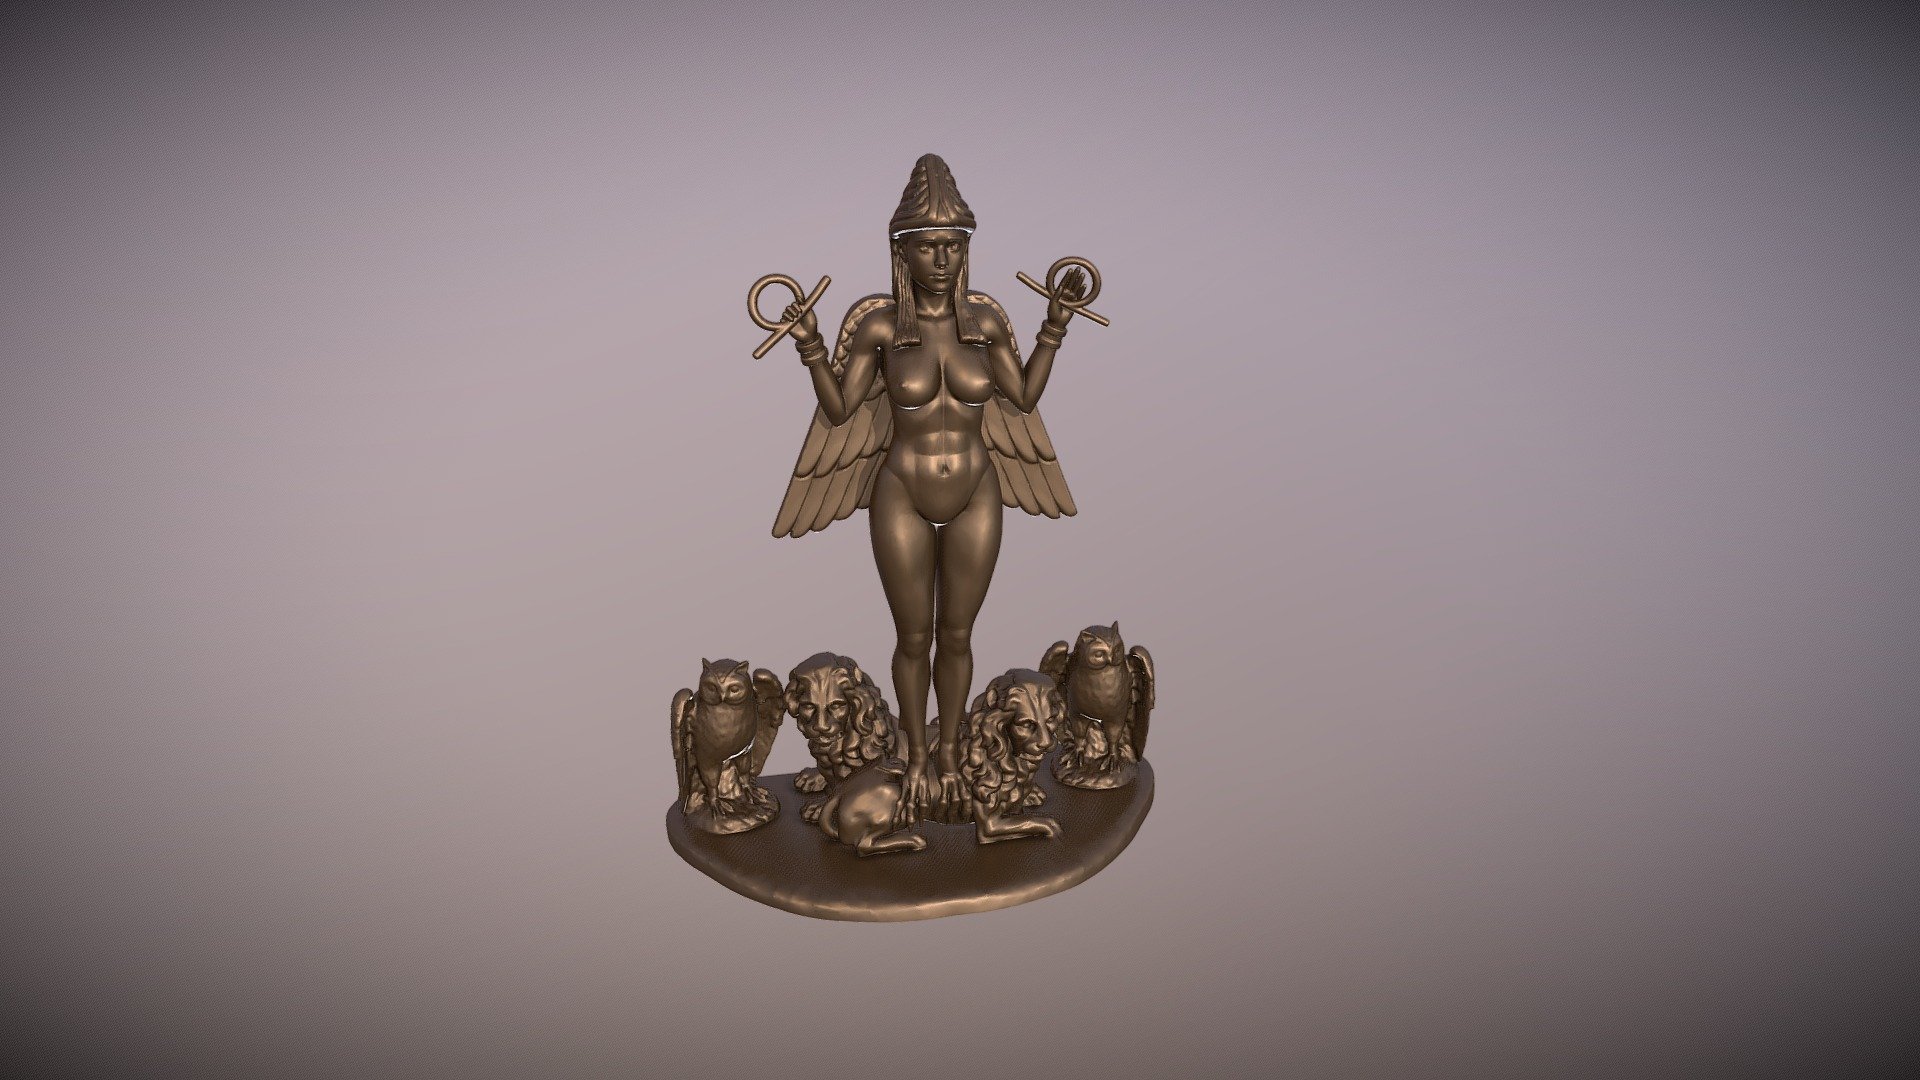 Lilith or ishtar statue 3d print model.

Lilith or Lilith is a legendary figure from Mesopotamian mythology and Jewish demonological folklore. Lilith's children are called lilim.

The model has been created in zbrush based on the original relief of the Queen of the Night 3d model